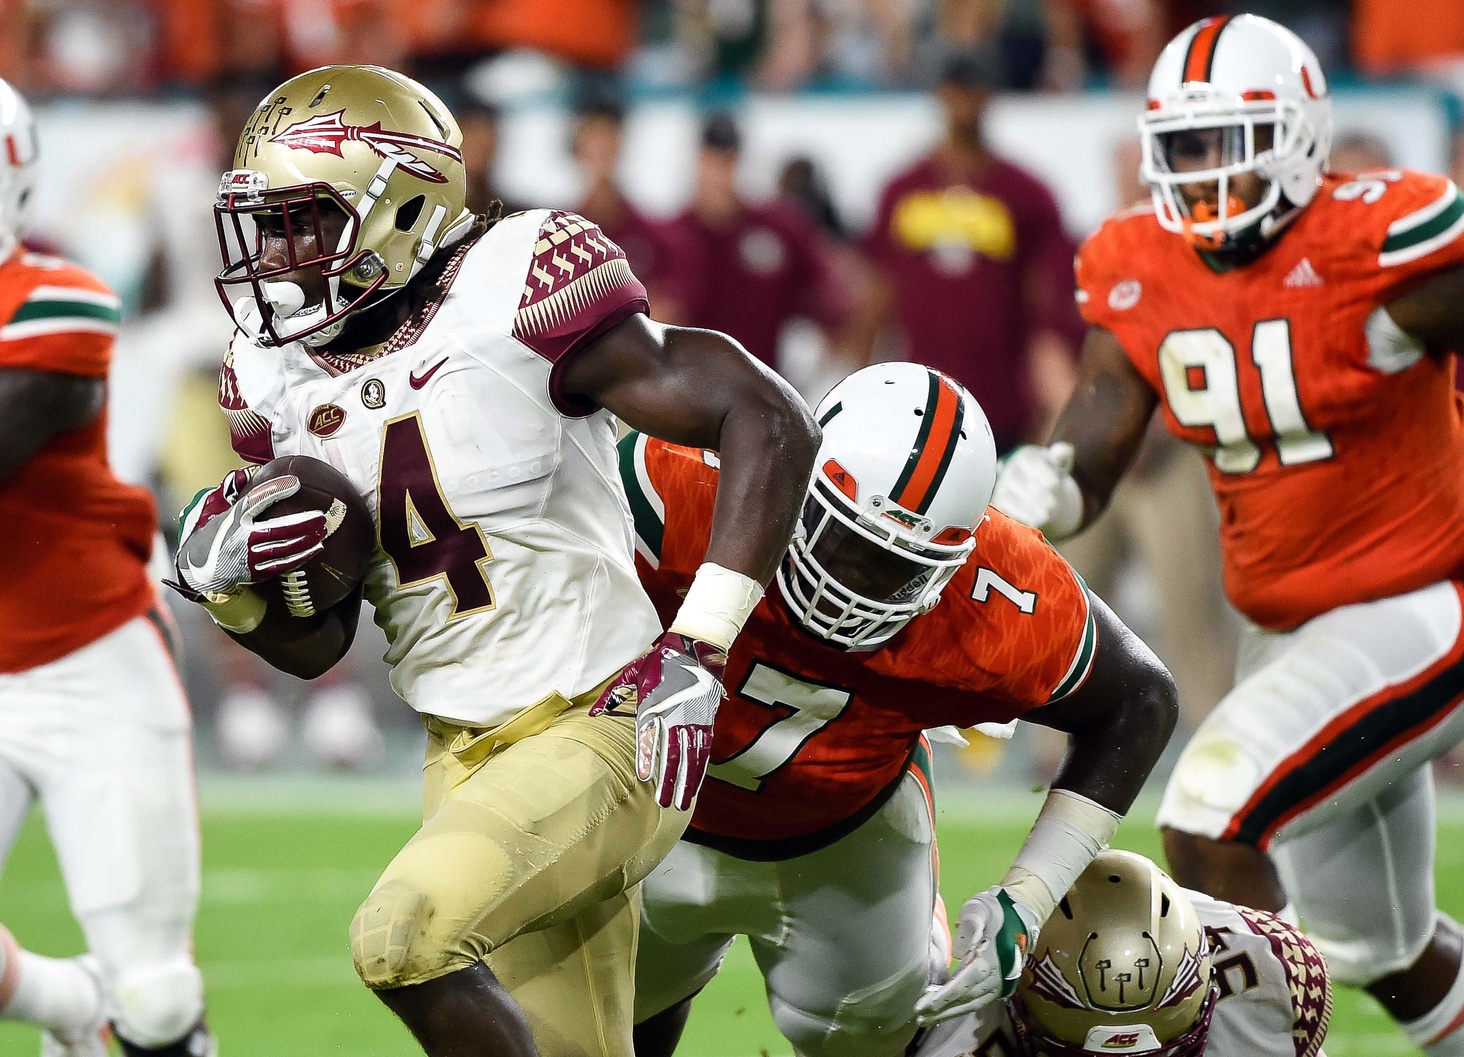 Oct 8, 2016; Miami Gardens, FL, USA; Florida State Seminoles running back Dalvin Cook (4) carries the ball during the first half against Miami Hurricanes at Hard Rock Stadium. Mandatory Credit: Steve Mitchell-USA TODAY Sports